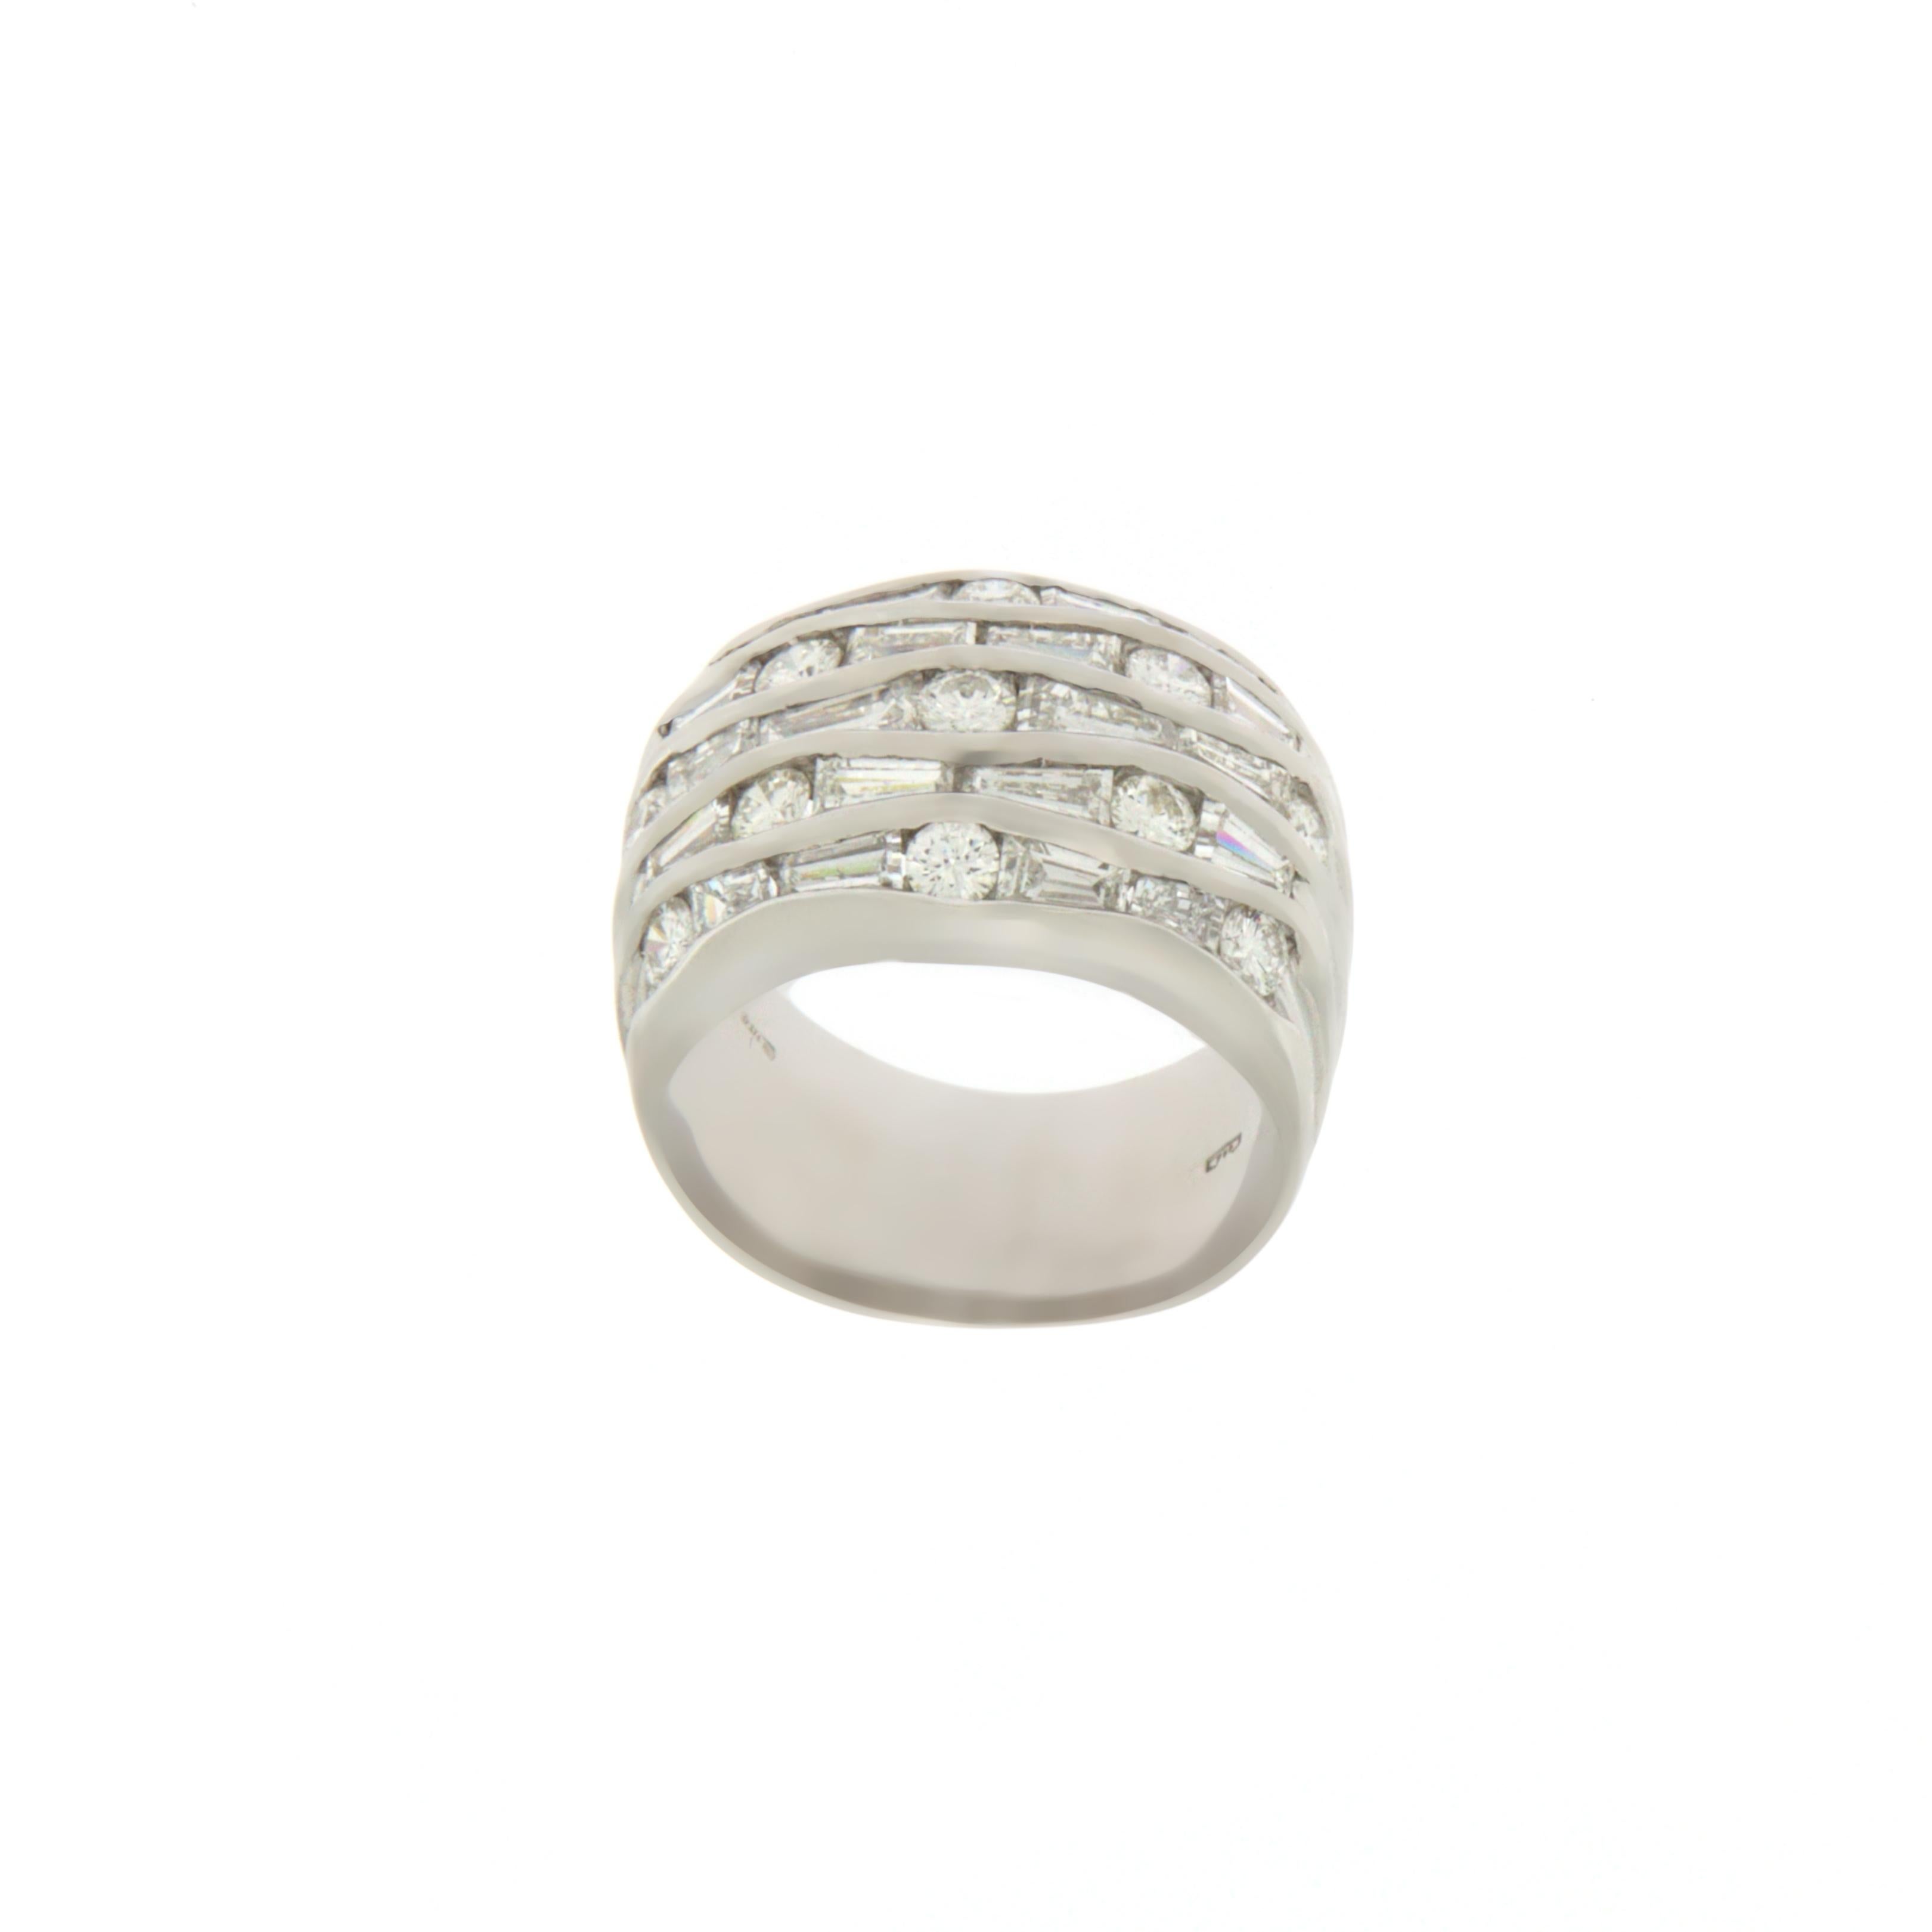 18-karat white gold band rings with diamonds round and baguette cut, entirely handmade by expert Italian goldsmiths.

Total weight of  diamonds 3 carats 
Shade scale H - Purity Vs1
Total weight of the ring 11 grams
Ring size 14 ITA - 6.75 USA - 54